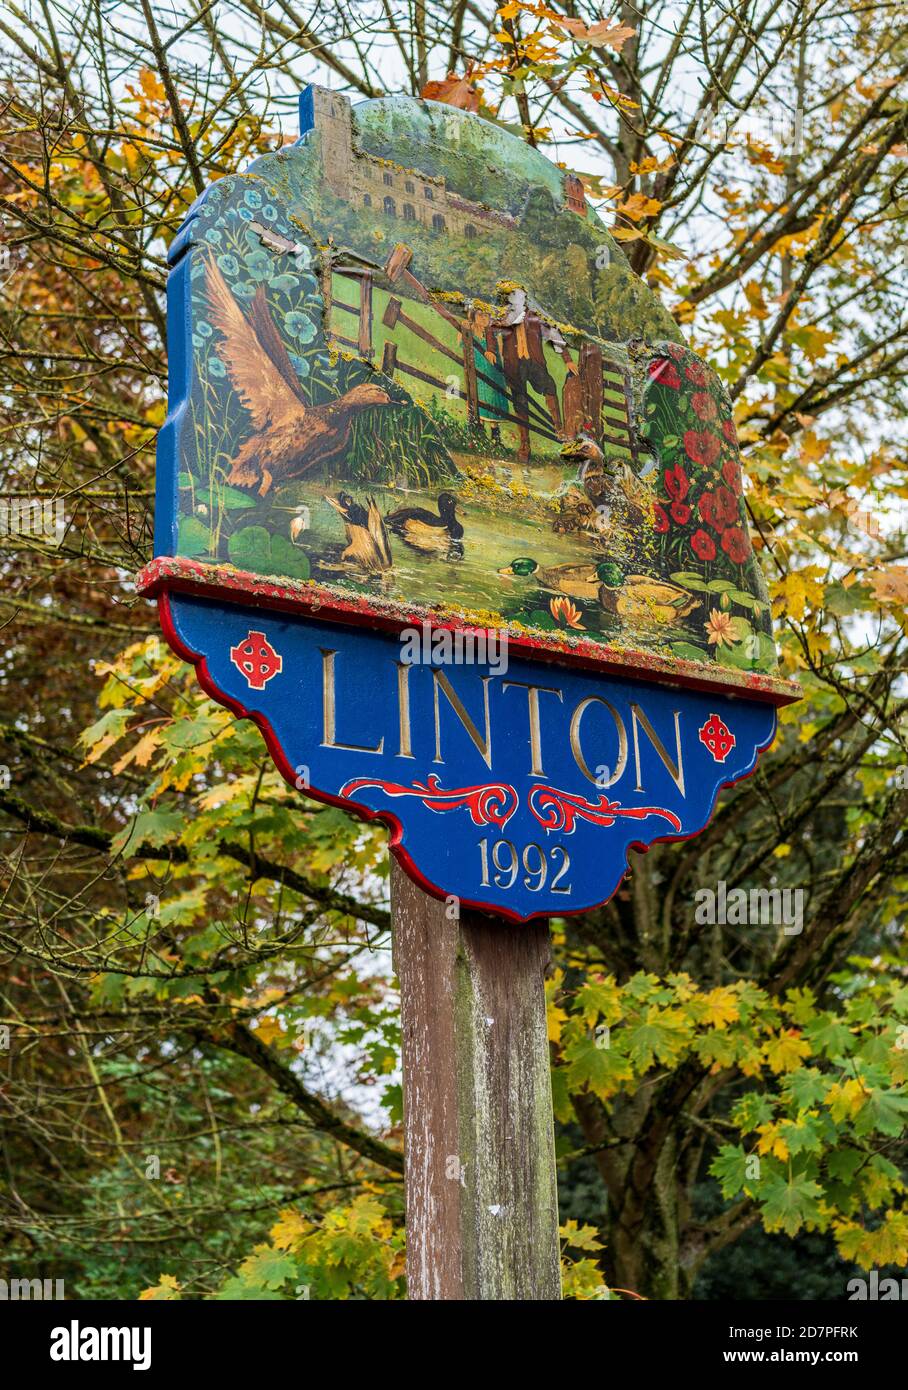 Linton Village Sign - Linton Cambridgeshire. Established at the time of the Domesday book, population around 4500 (2011). Sign features clapper stile. Stock Photo